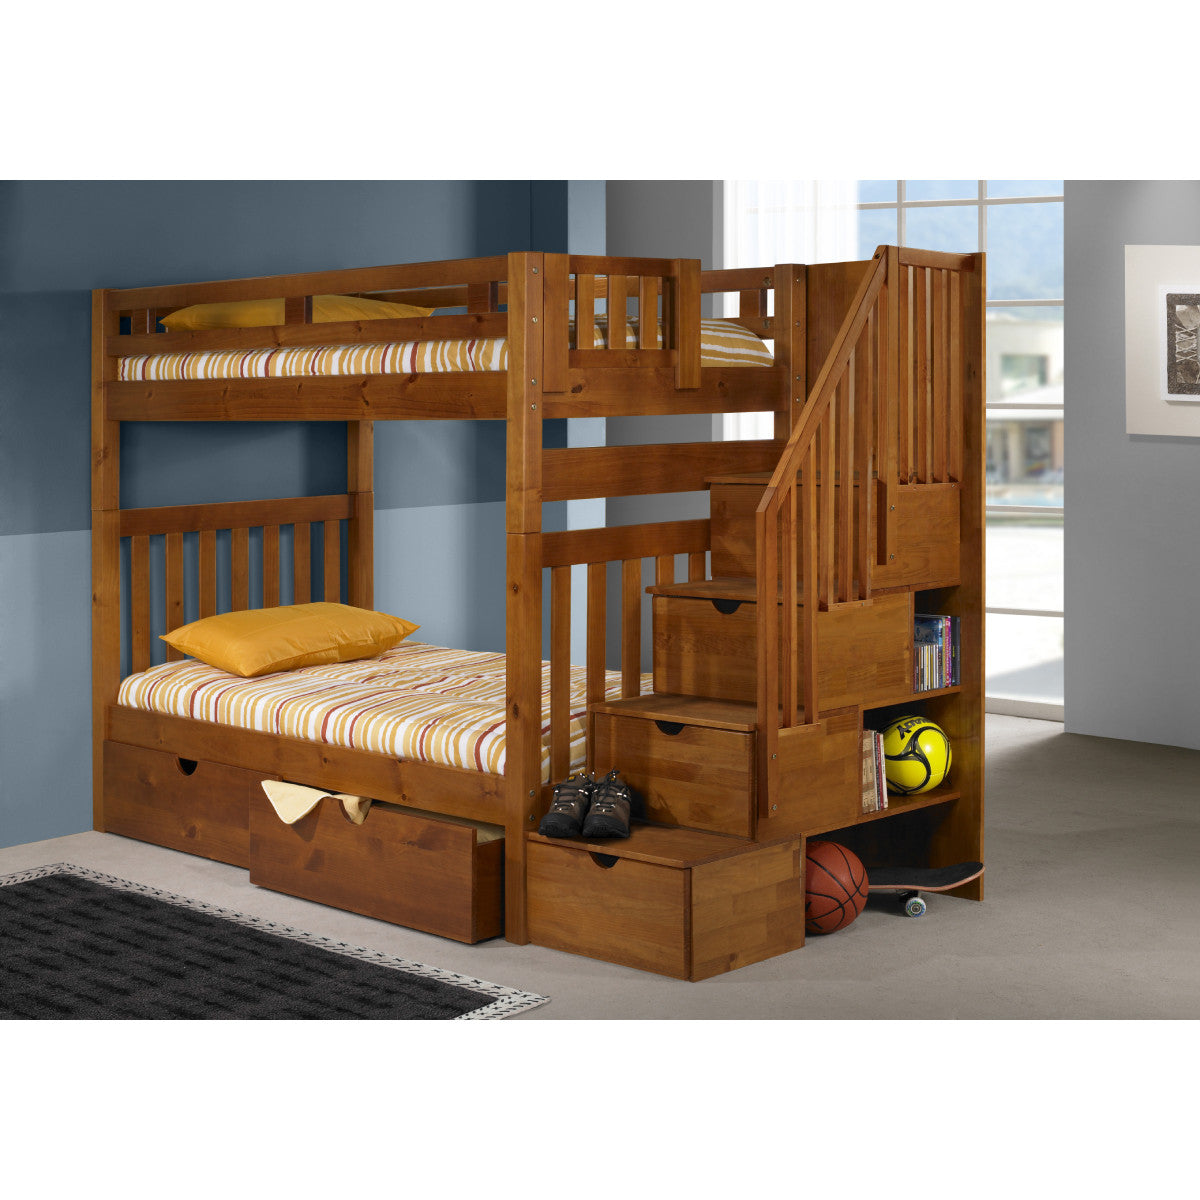 TWIN/TWIN TALL MISSION STAIRWAY BUNK BED WITH DUAL UNDERBED DRAWERS IN HONEY FINISH